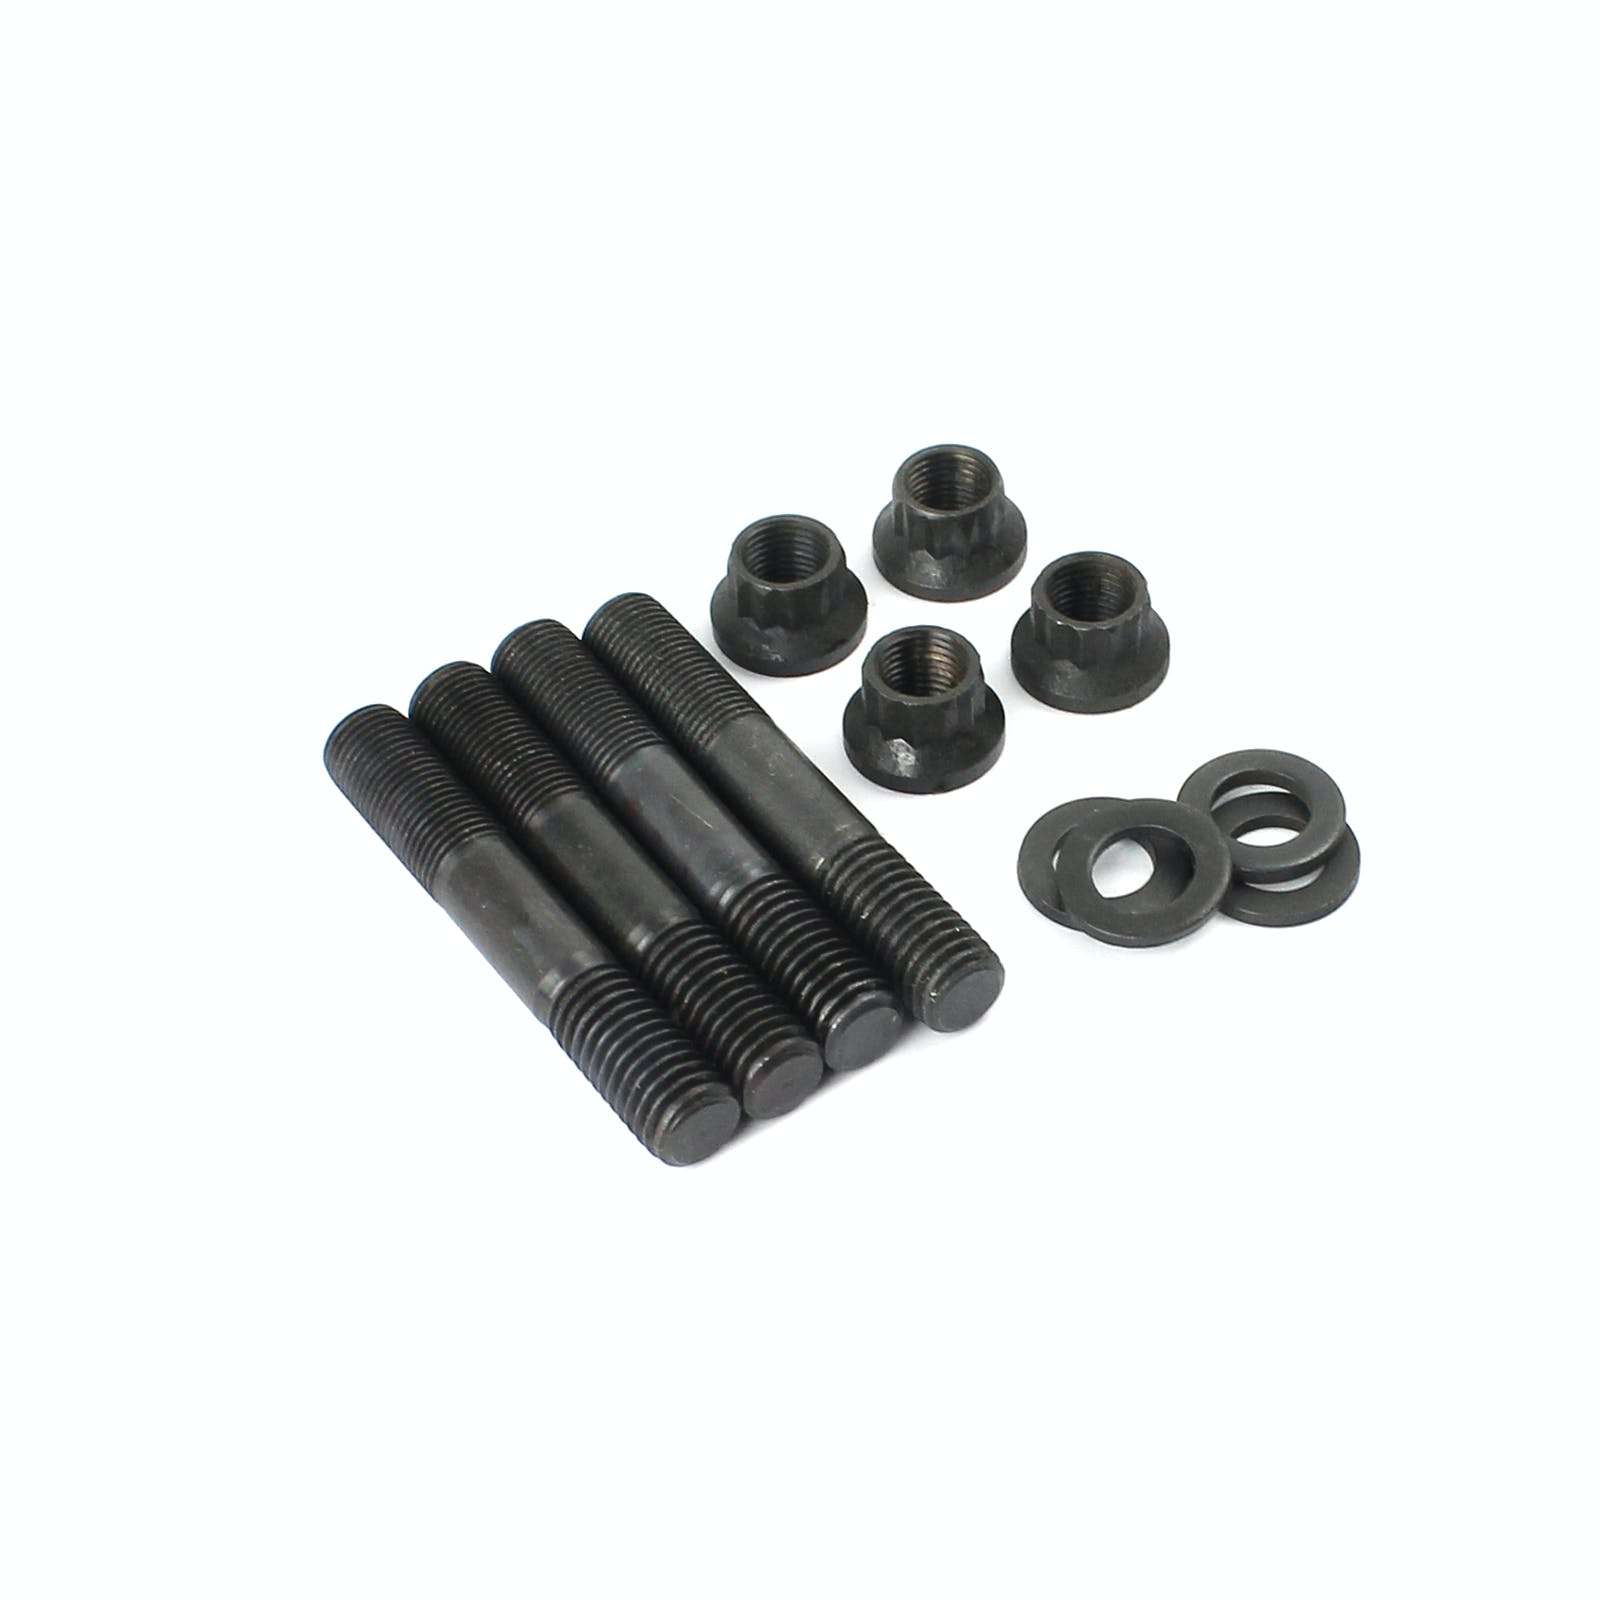 Speedmaster PCE205.1001 9 in. Differential Bearing Cap 12 point Stud Kit (1/2 x 75mm Long)